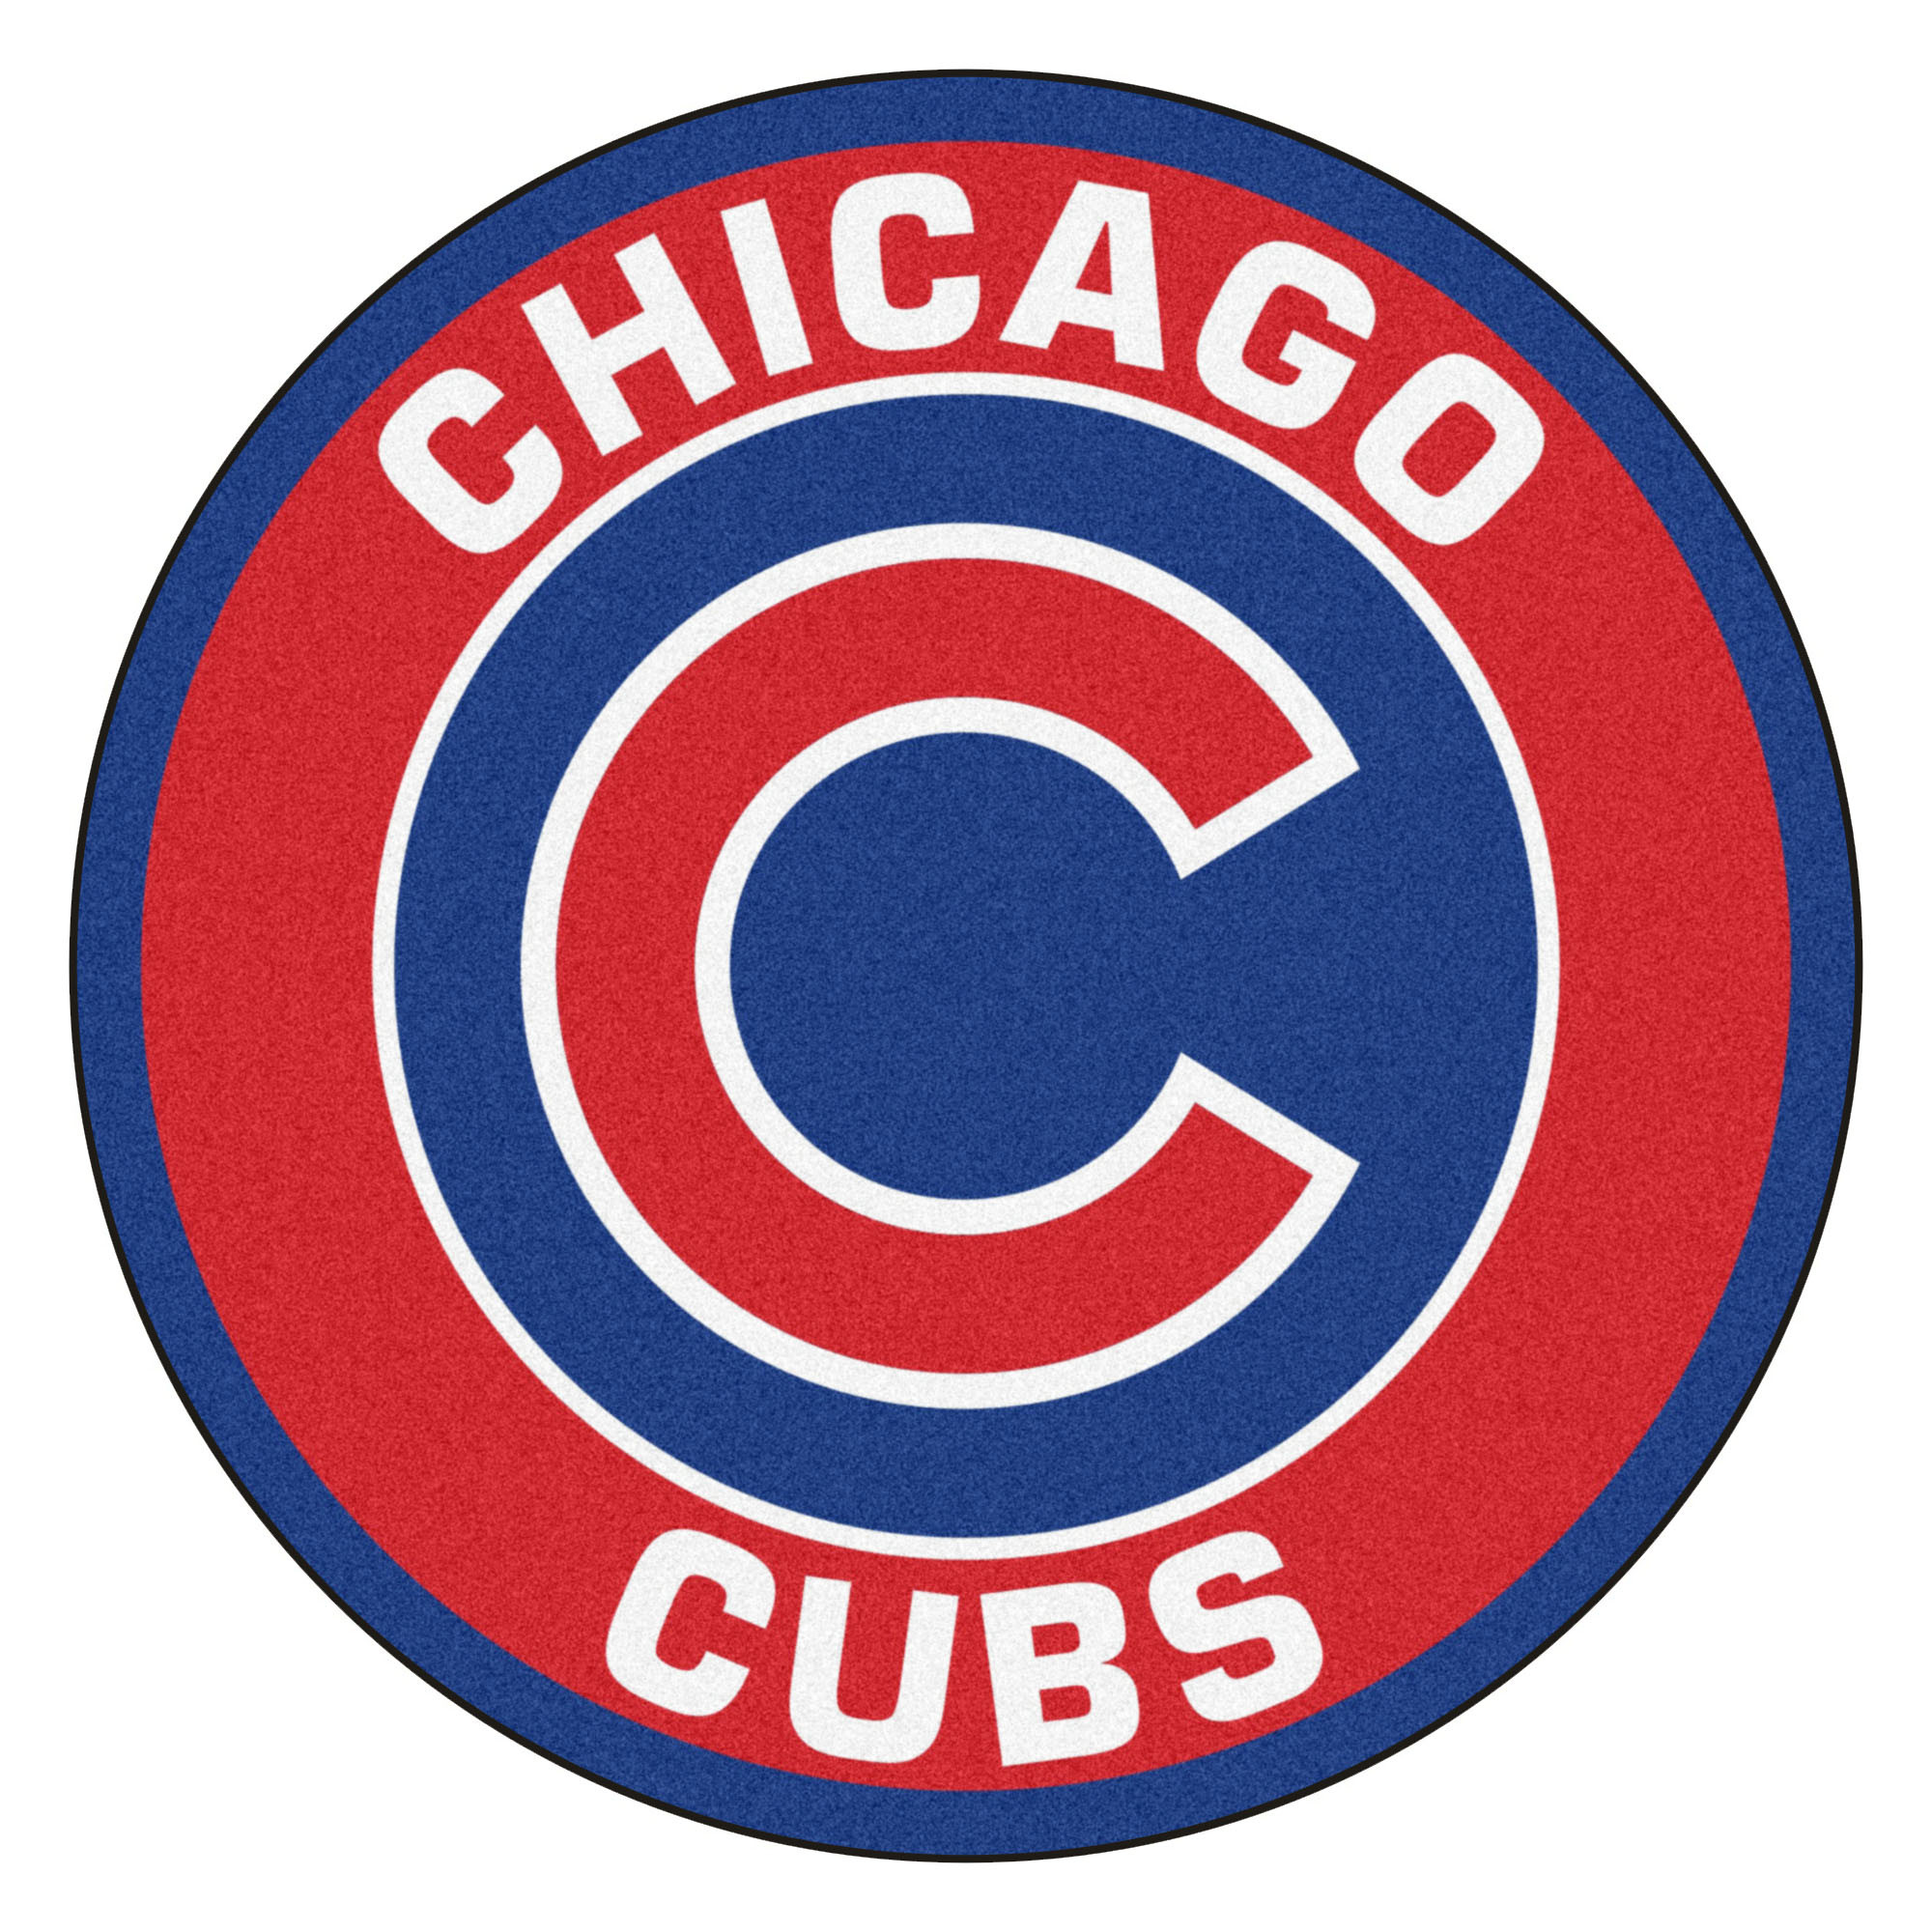 2000x2000 ... File:Chicago Cubs logo 1937 to 1940.png - Wikimedia Commons ...